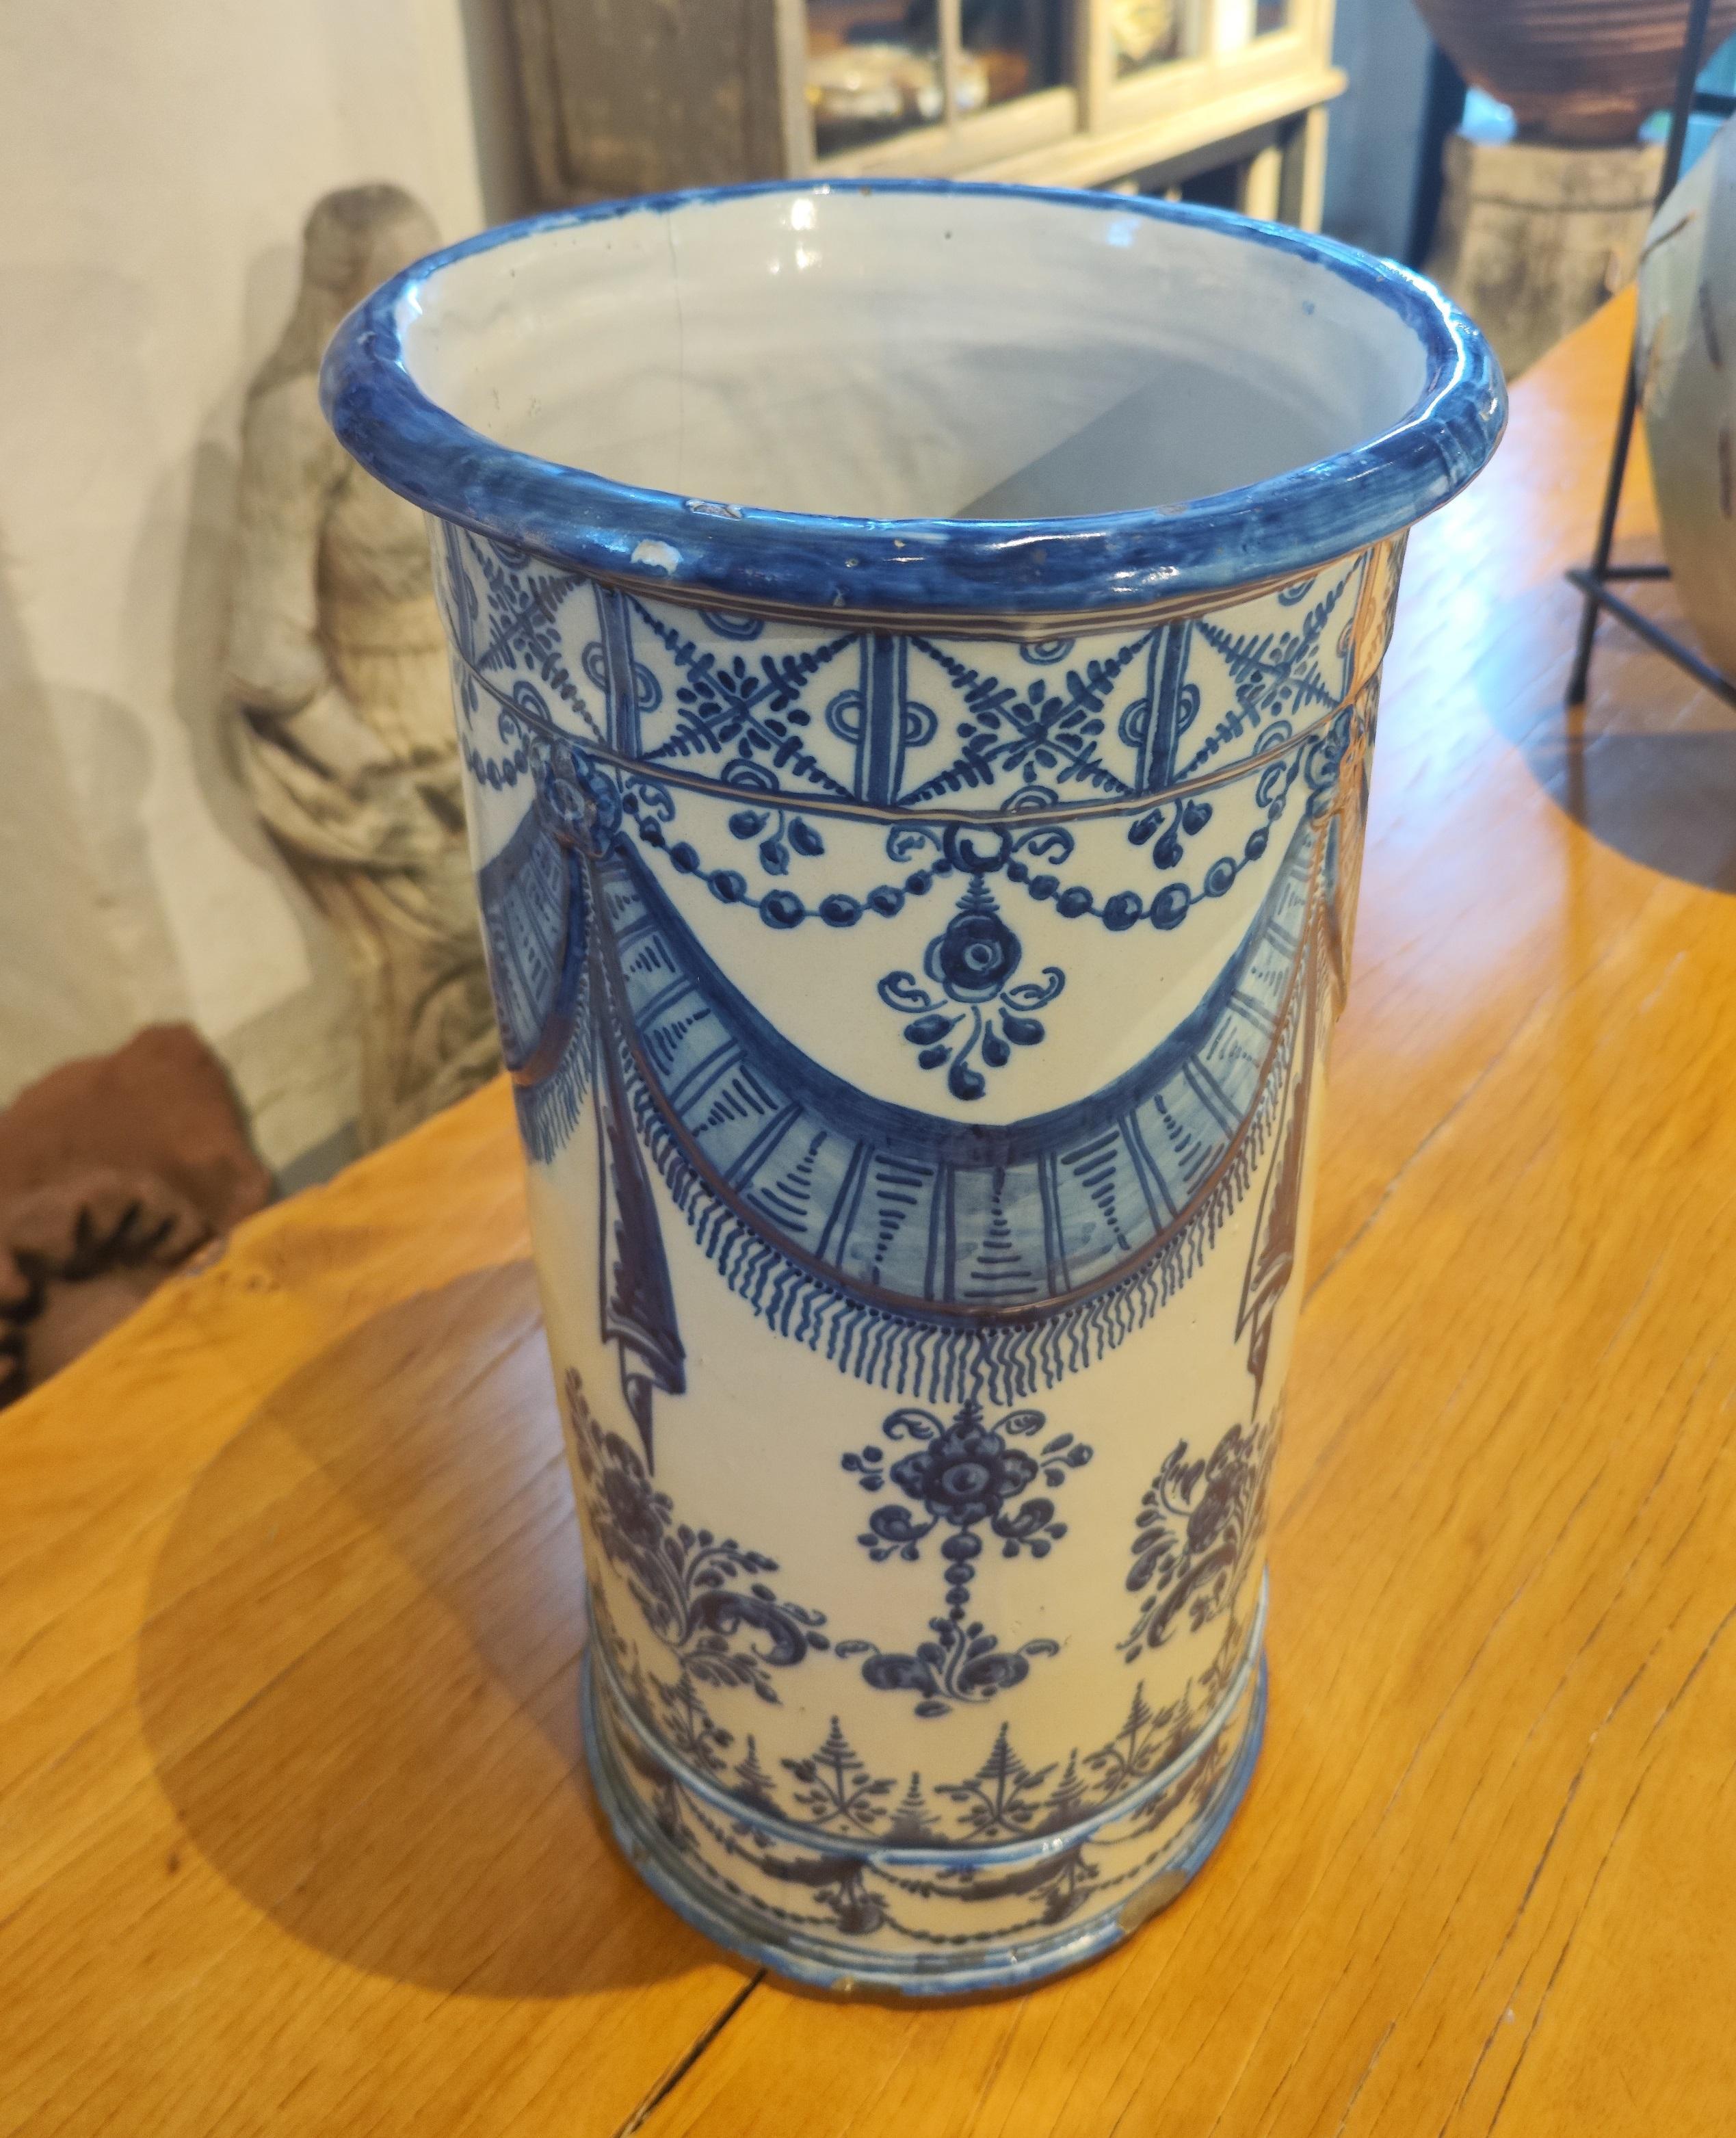 Talavera ceramic signed on the base with blue and white decoration of garlands and flowers. Signed on the bottom Talavera, Spain and the number 383
